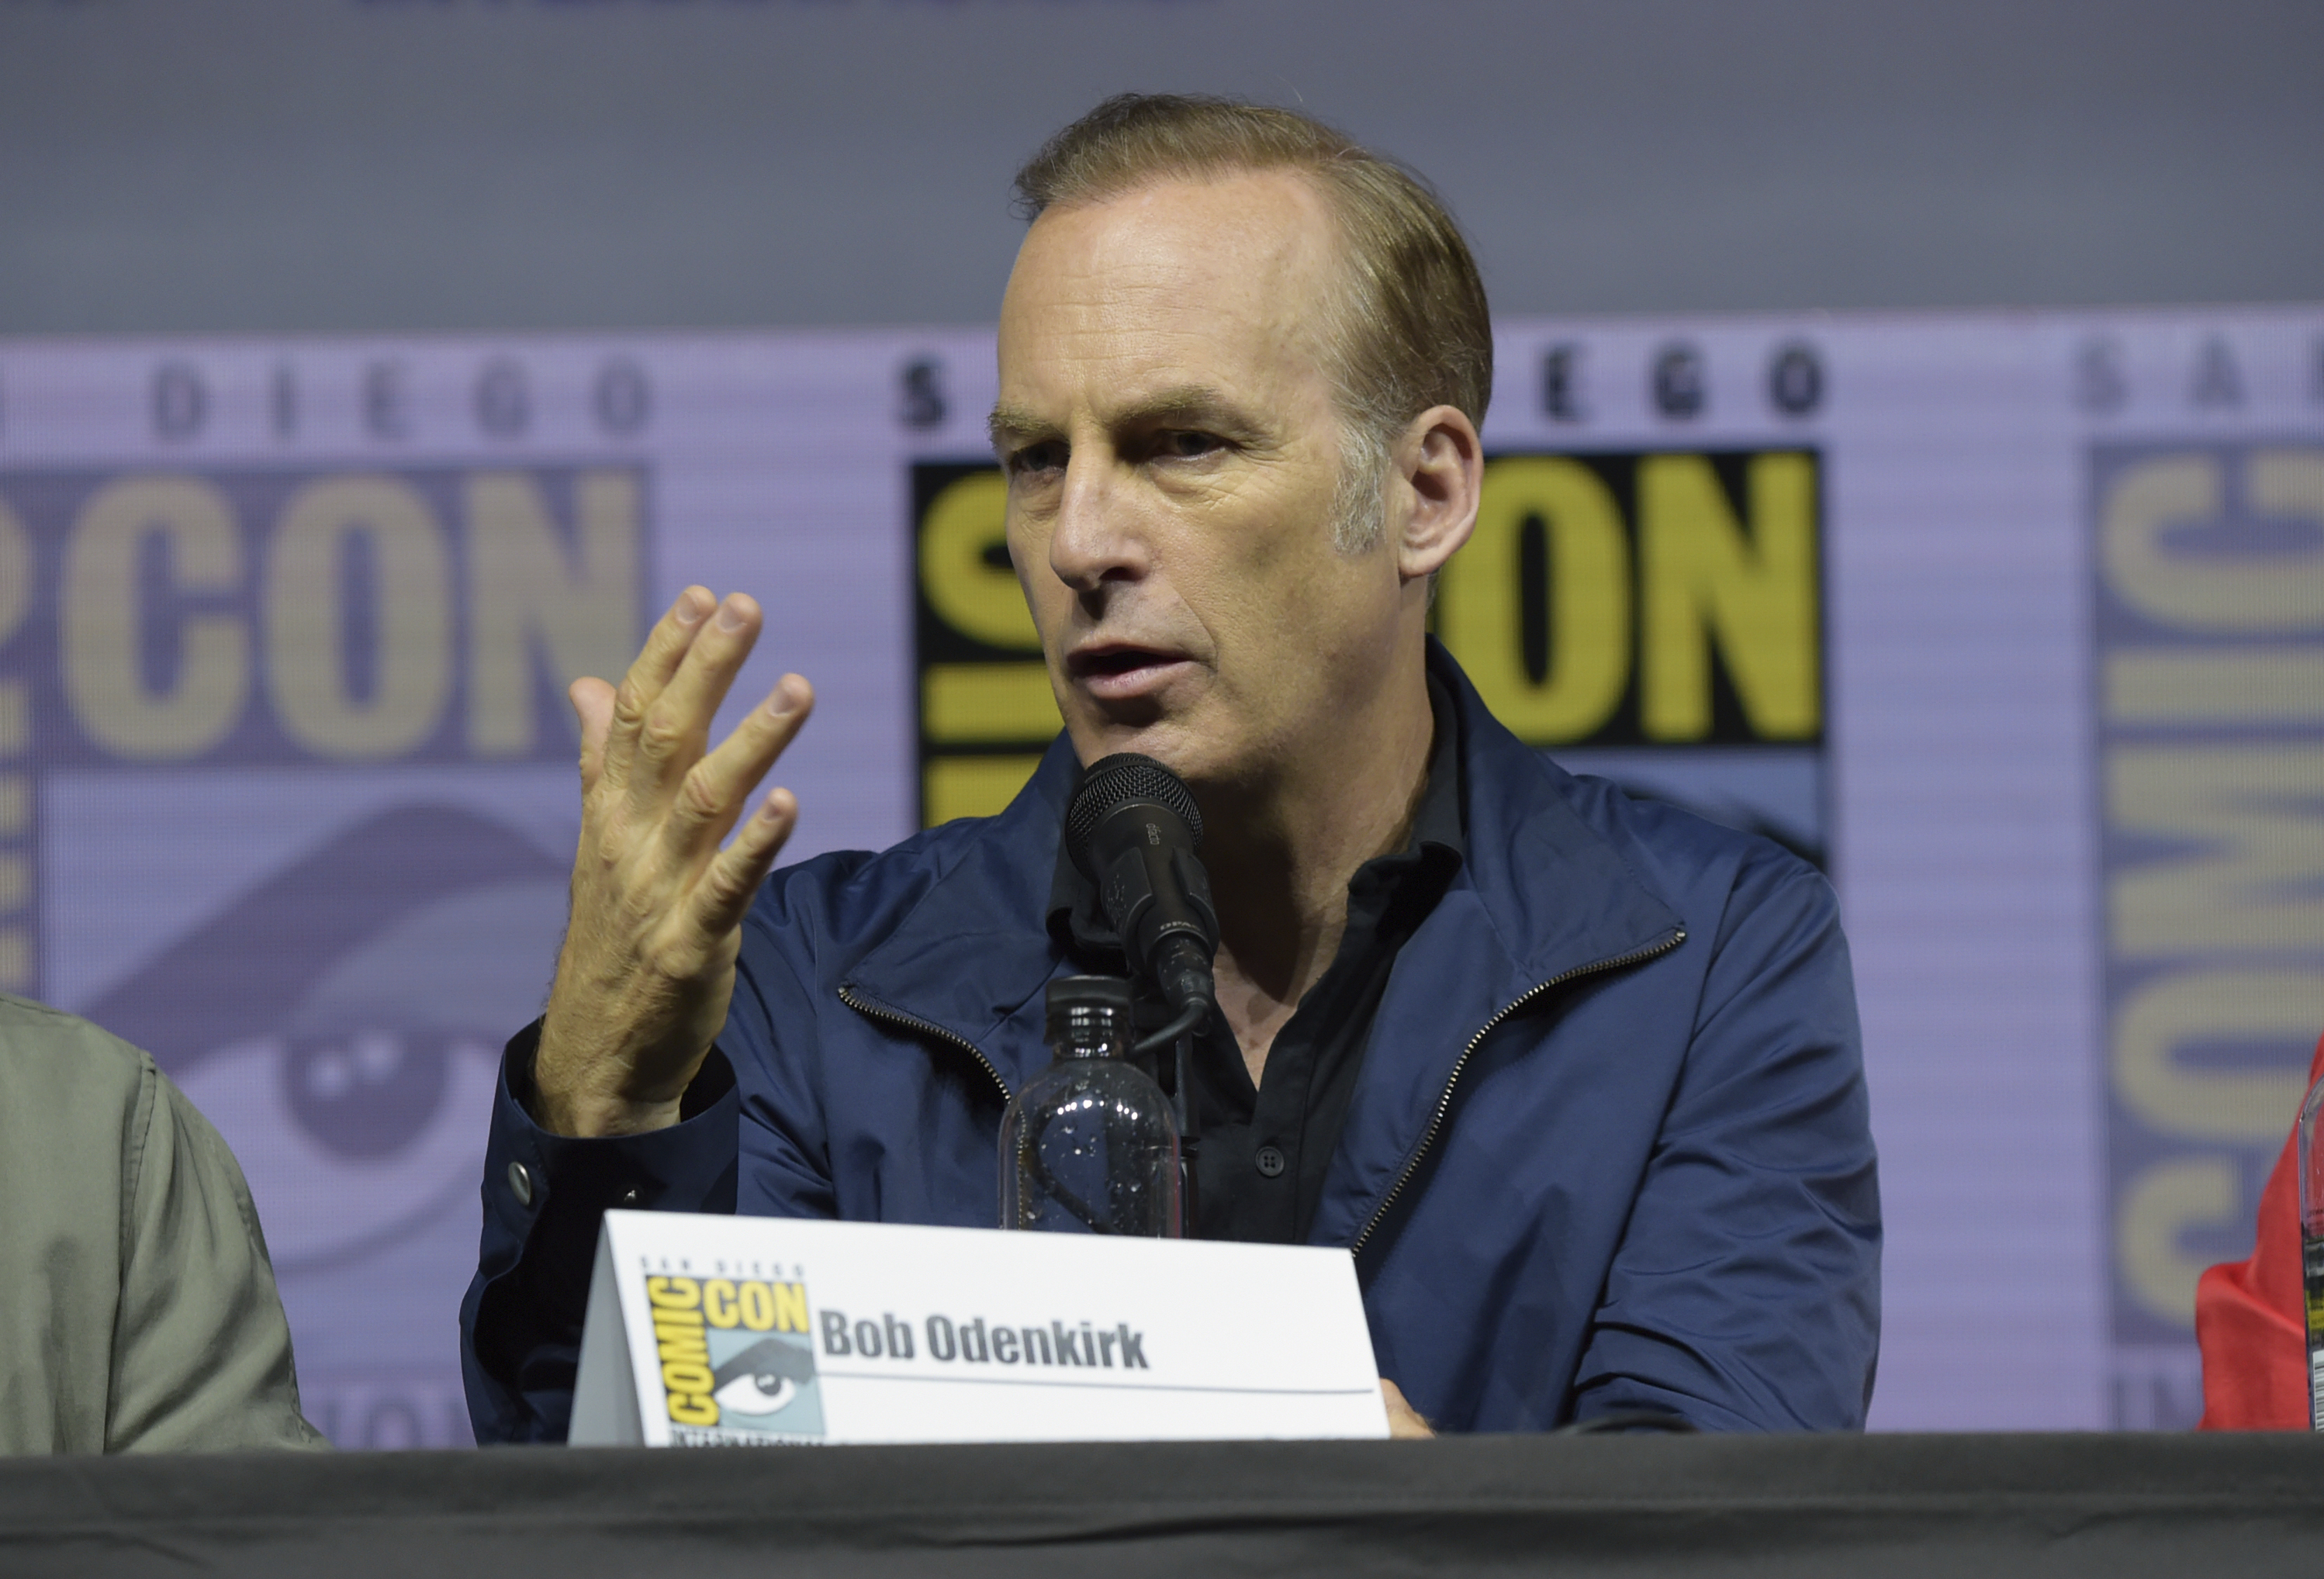 Bob Odenkirk speaks at the 